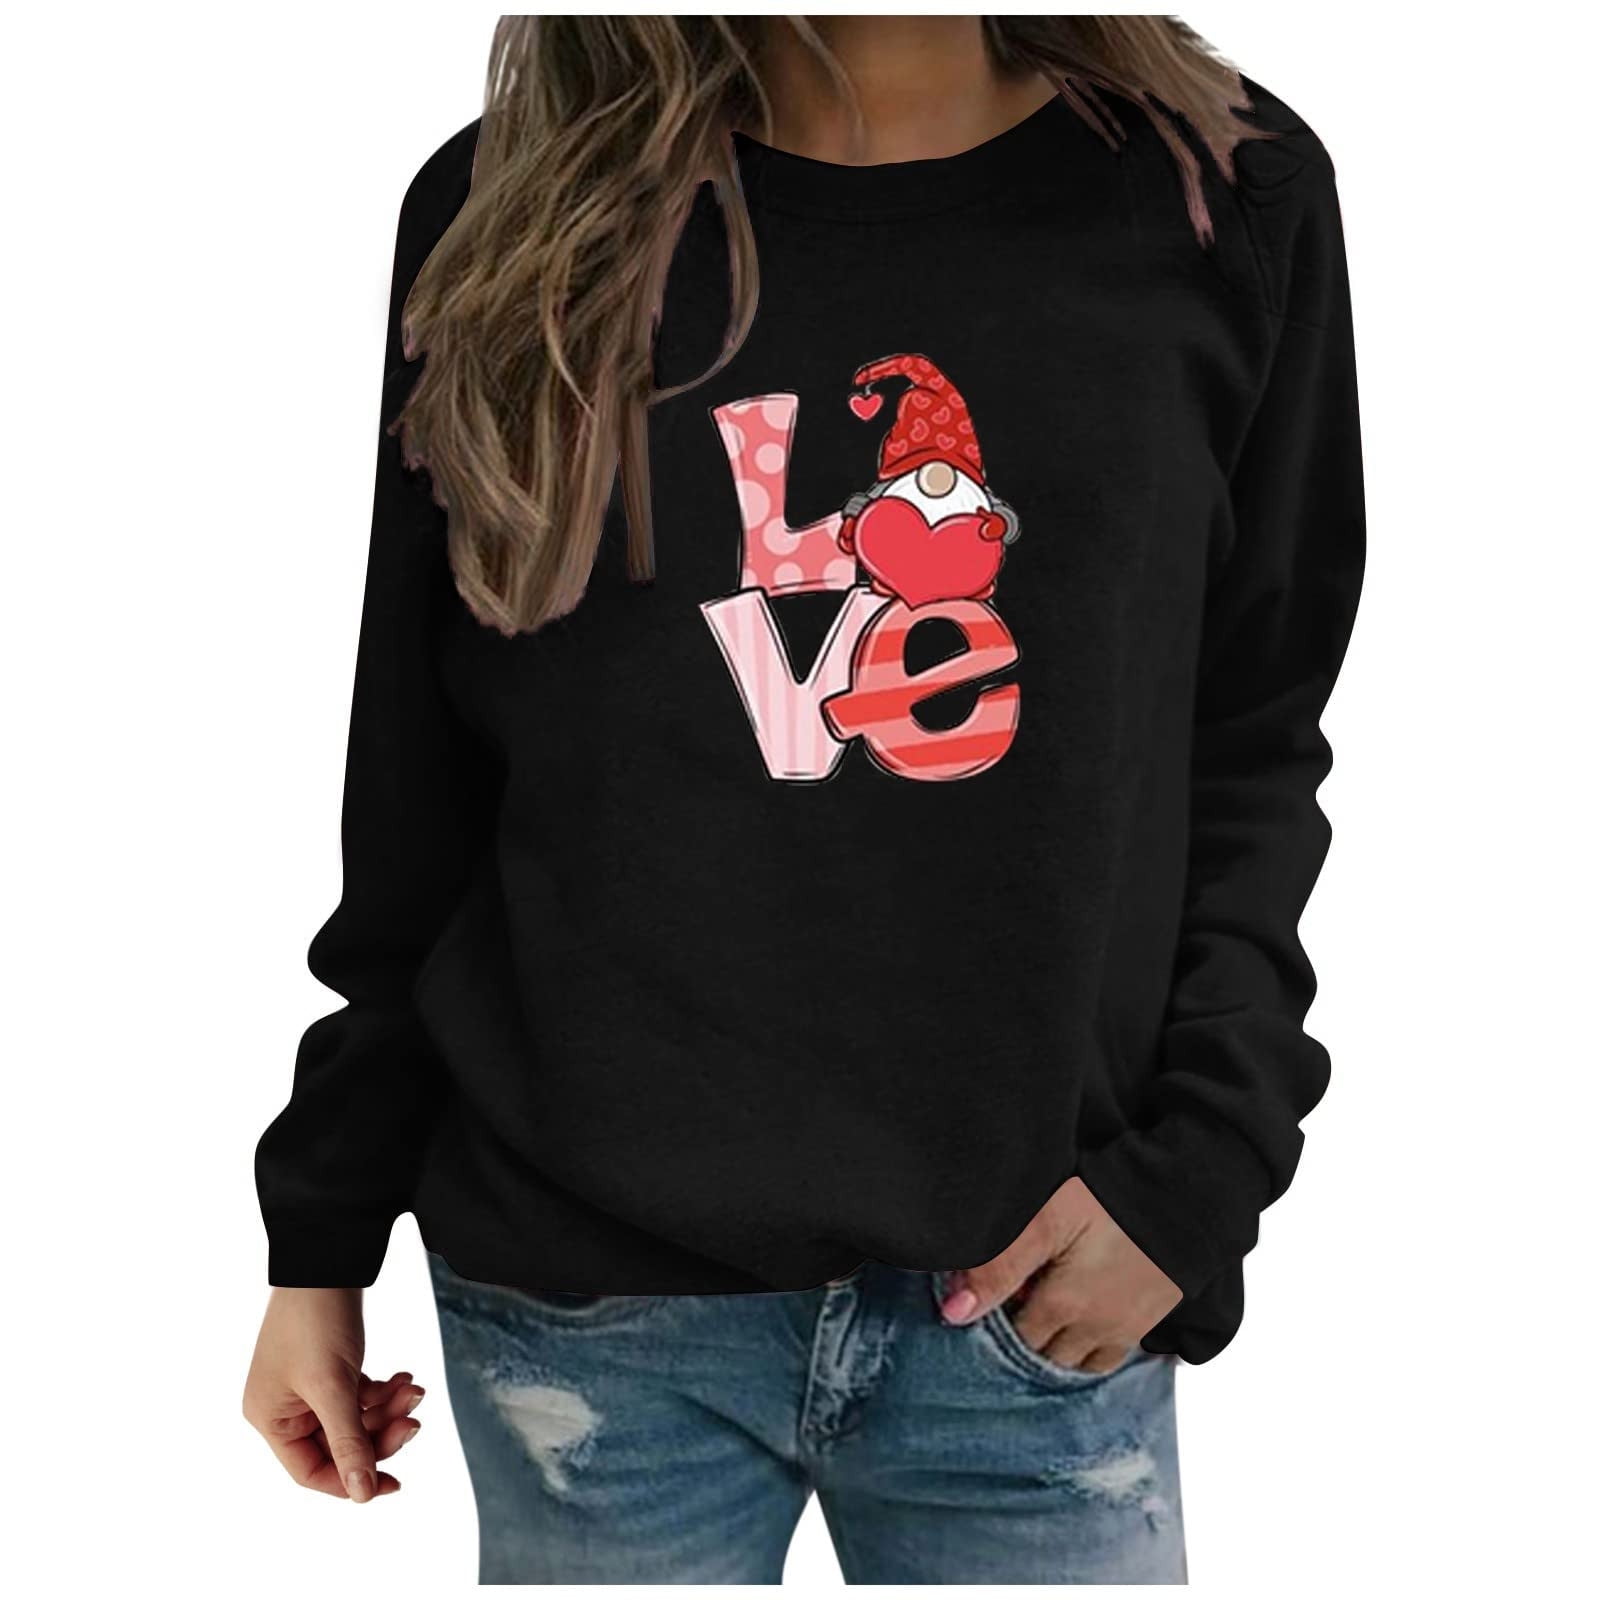 Taqqpue Love Heart Printed Long Sleeve Shirts for Women,Plus Size ...